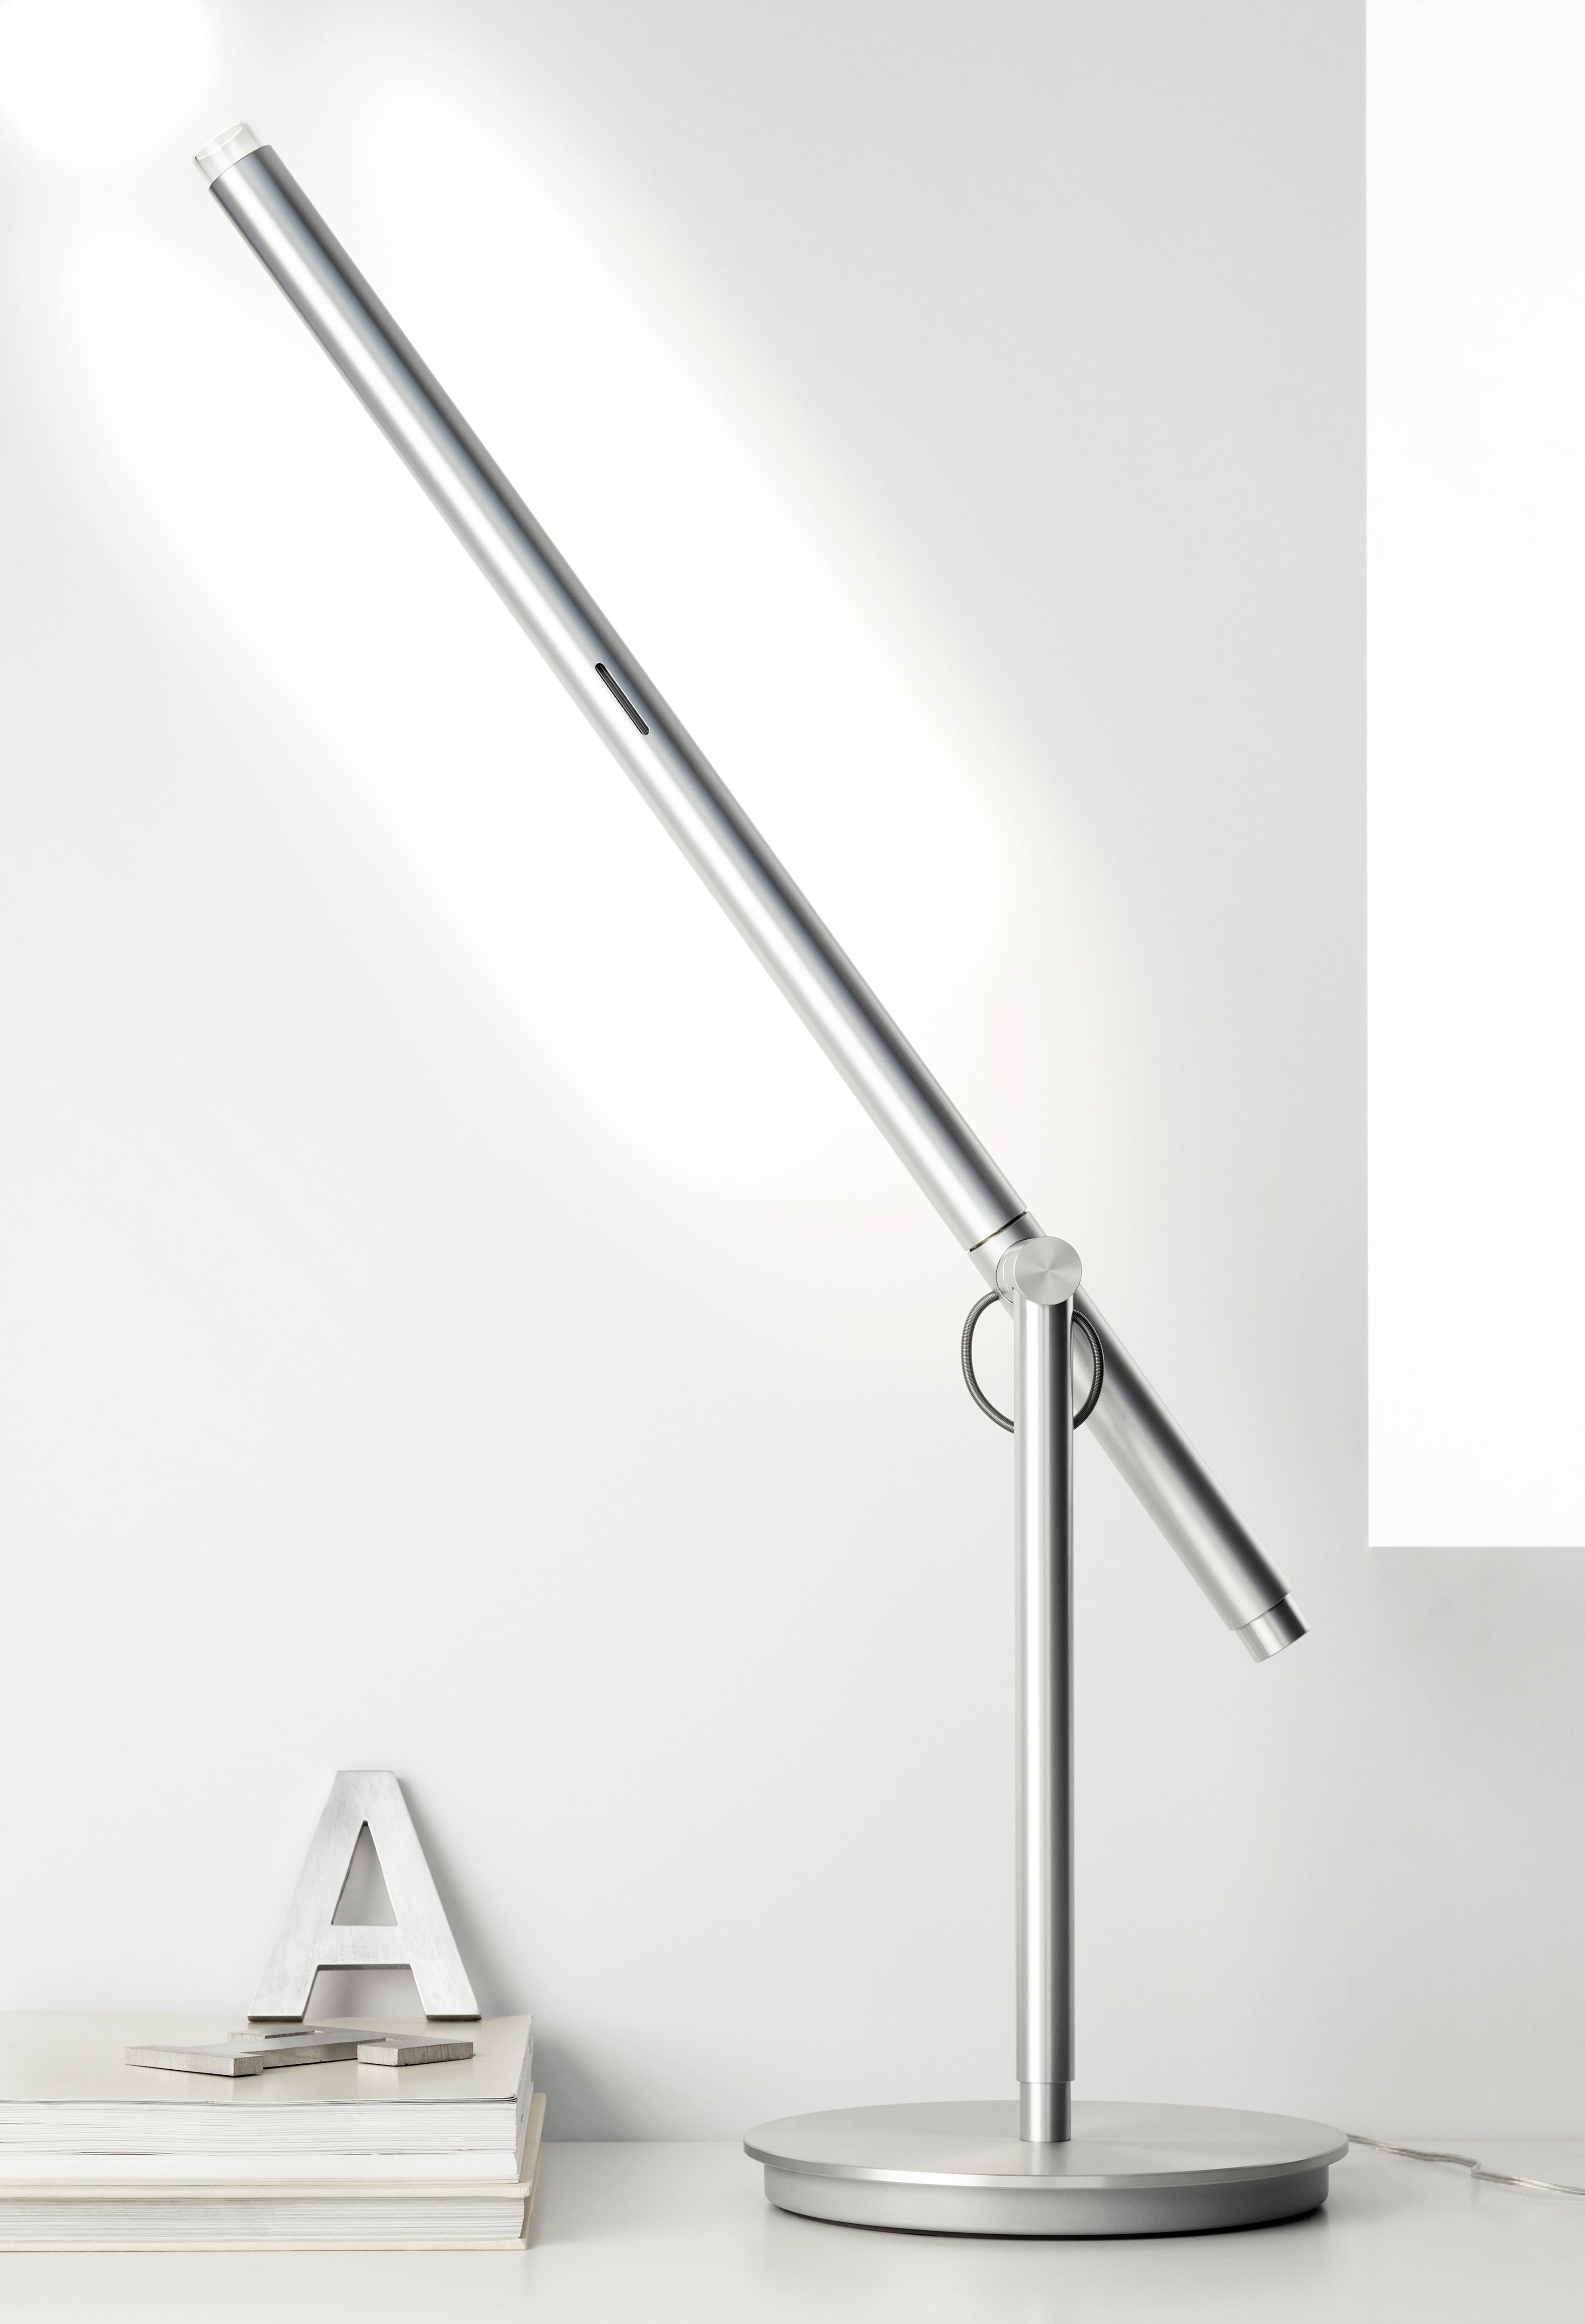 Brazo’s precision machined aluminum construction allows for optimal task lighting control with 360° adjustability and 90° tilt. Brazo features a luminous and energy-efficient LED light source which can be dialed to any desired beam-spread and